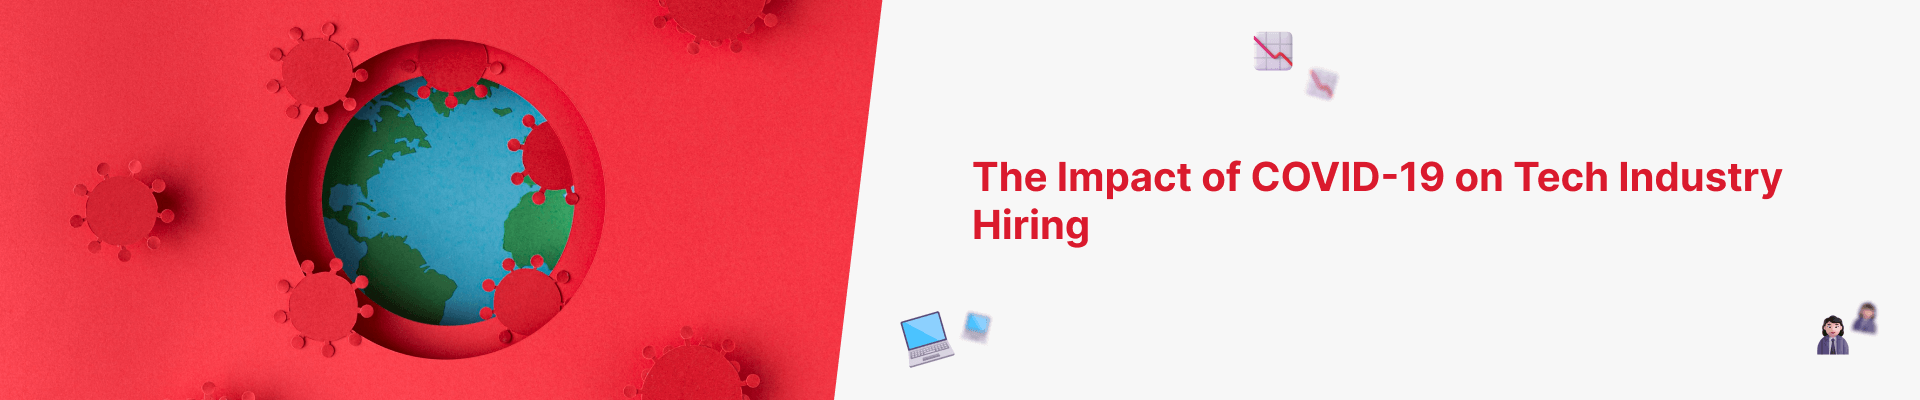 The Impact of COVID-19 on Tech Industry Hiring